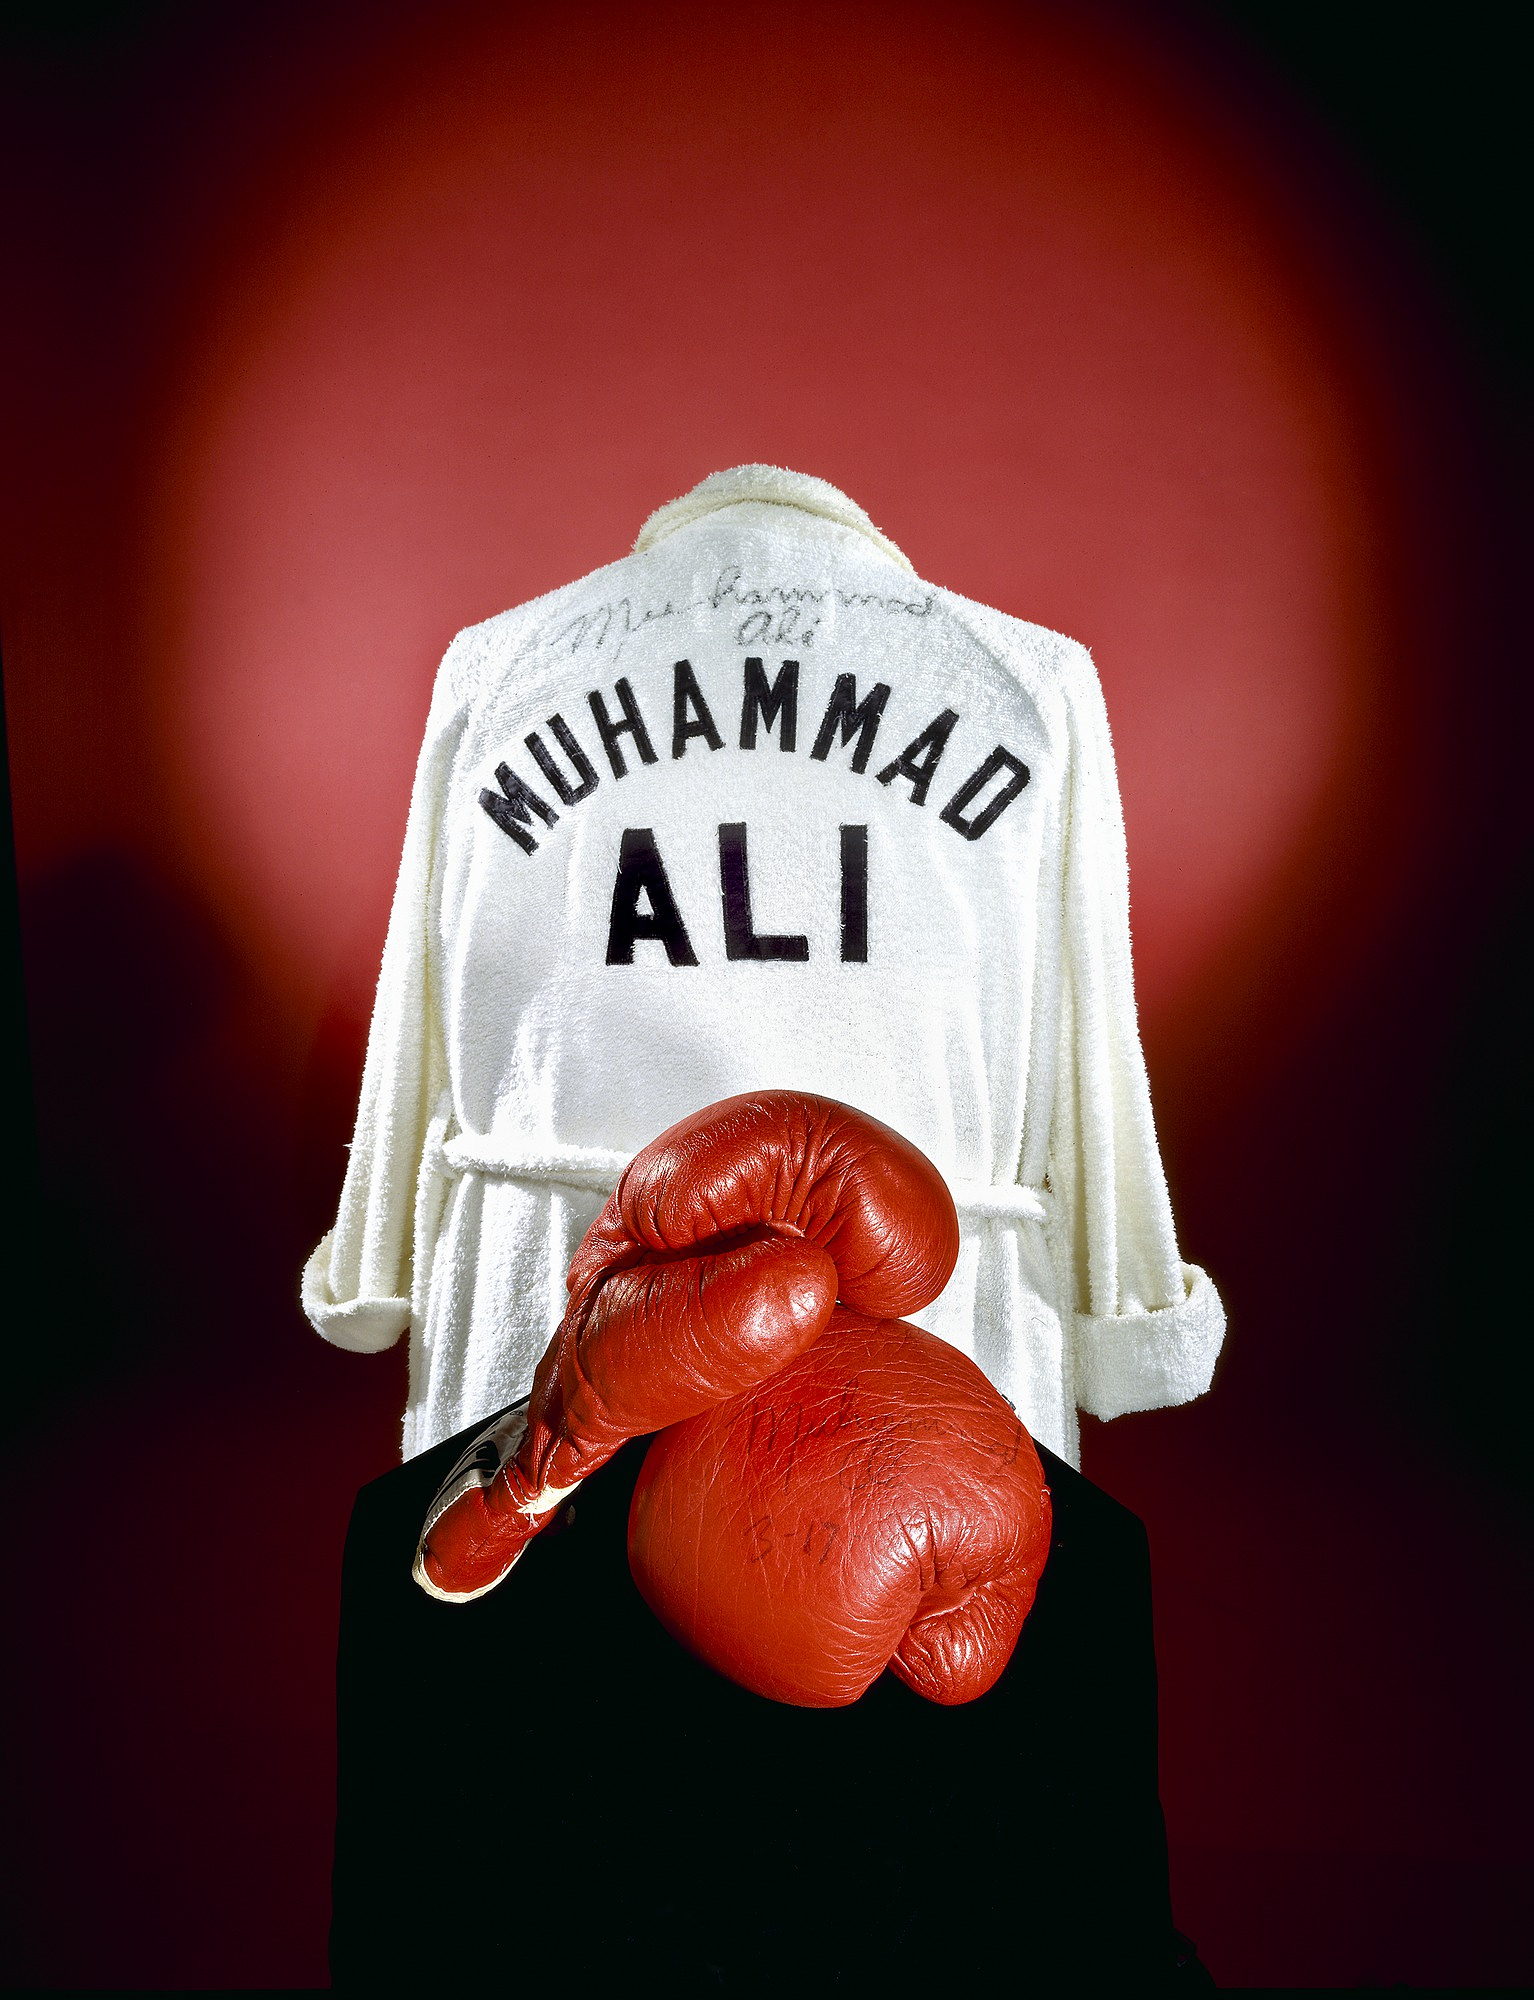 In 1976 the Smithsonian acquired Ali's boxing gloves and robe for an exhibition on the American Bicentennial,"A Nation of Nations." At the donation ceremony, before a crowd of reporters and cheering spectators, Ali predicted that his Everlast gloves would become"the most famous thing in this building."